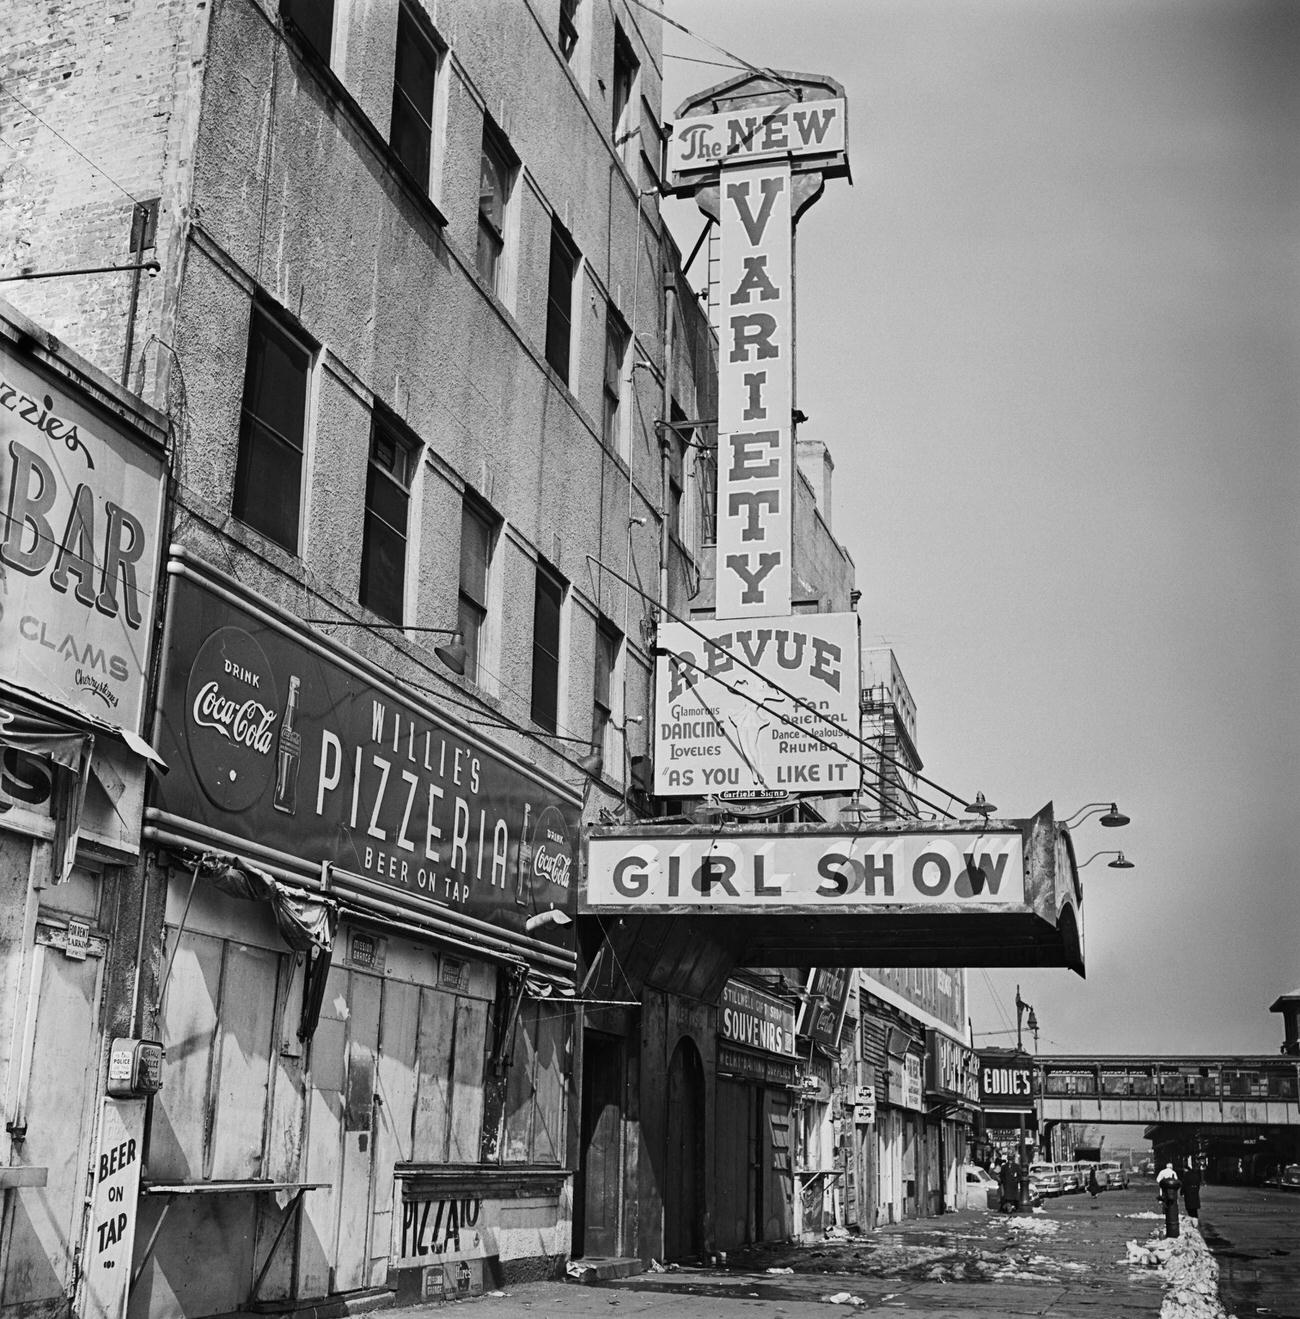 The New Variety Revue: Dilapidated Exterior In Coney Island, 1950.